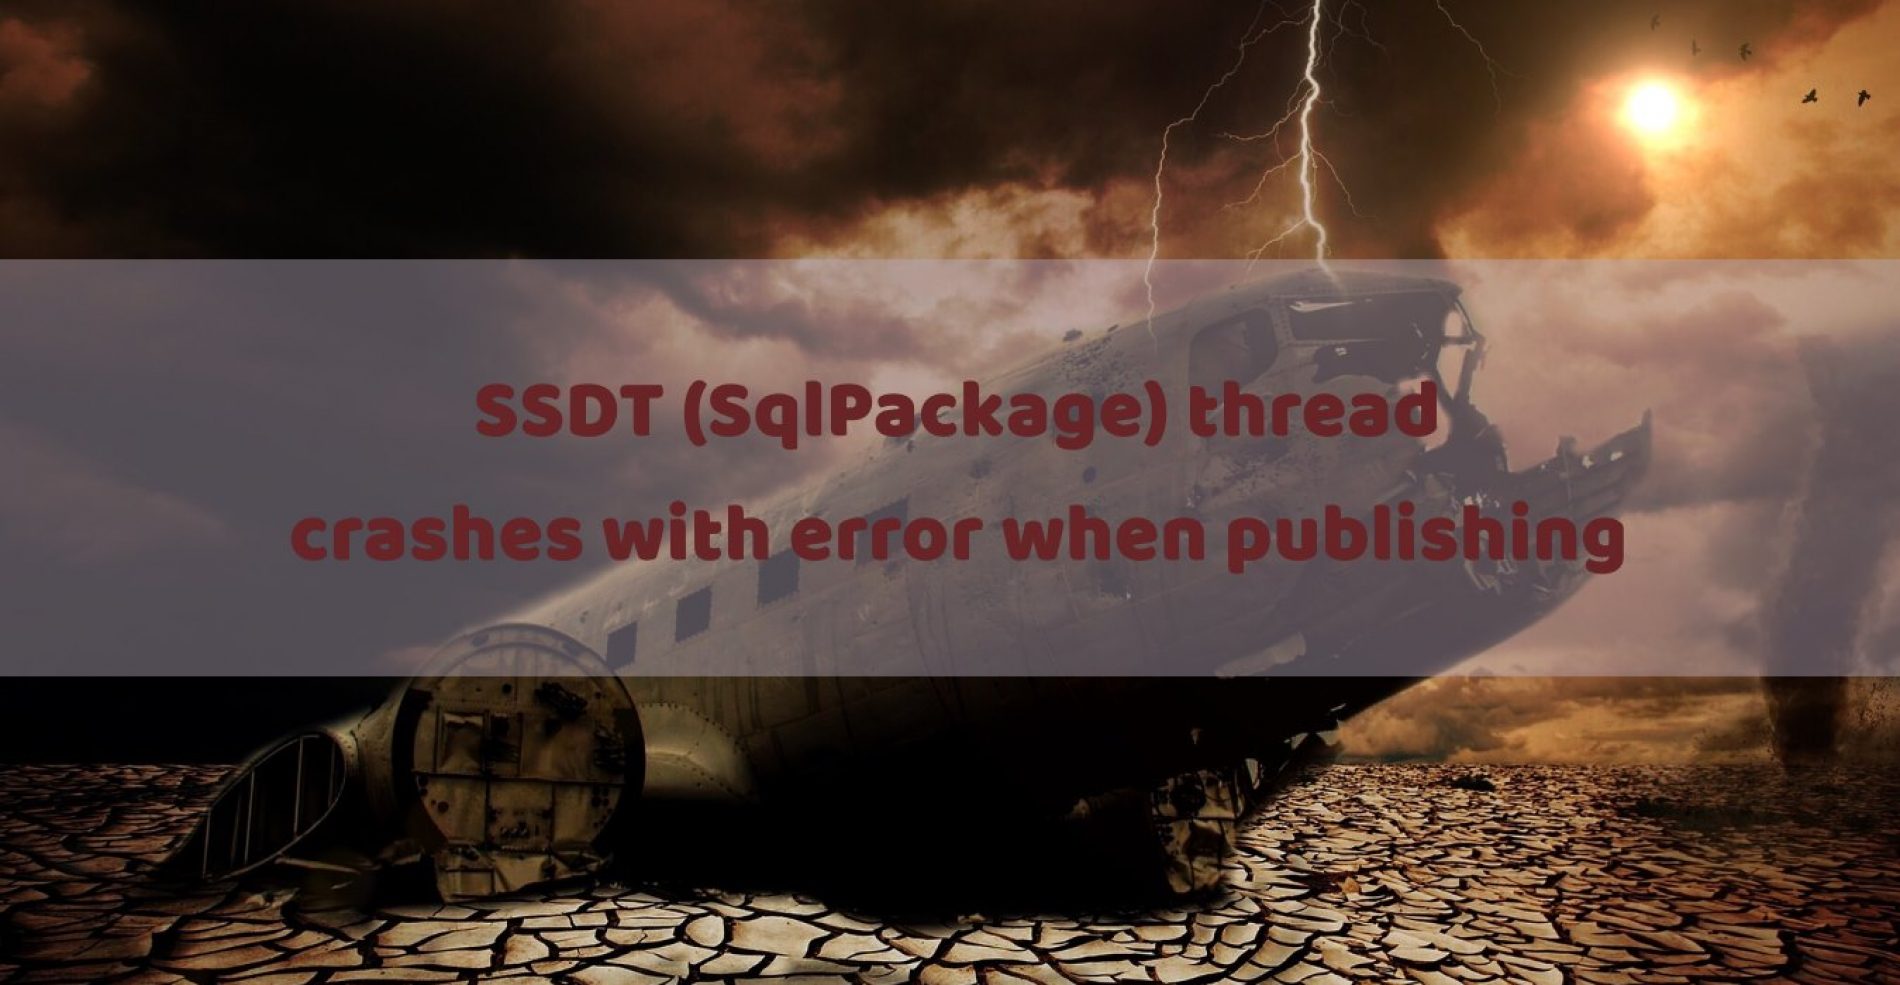 SSDT (SqlPackage) thread crashes with error when publishing